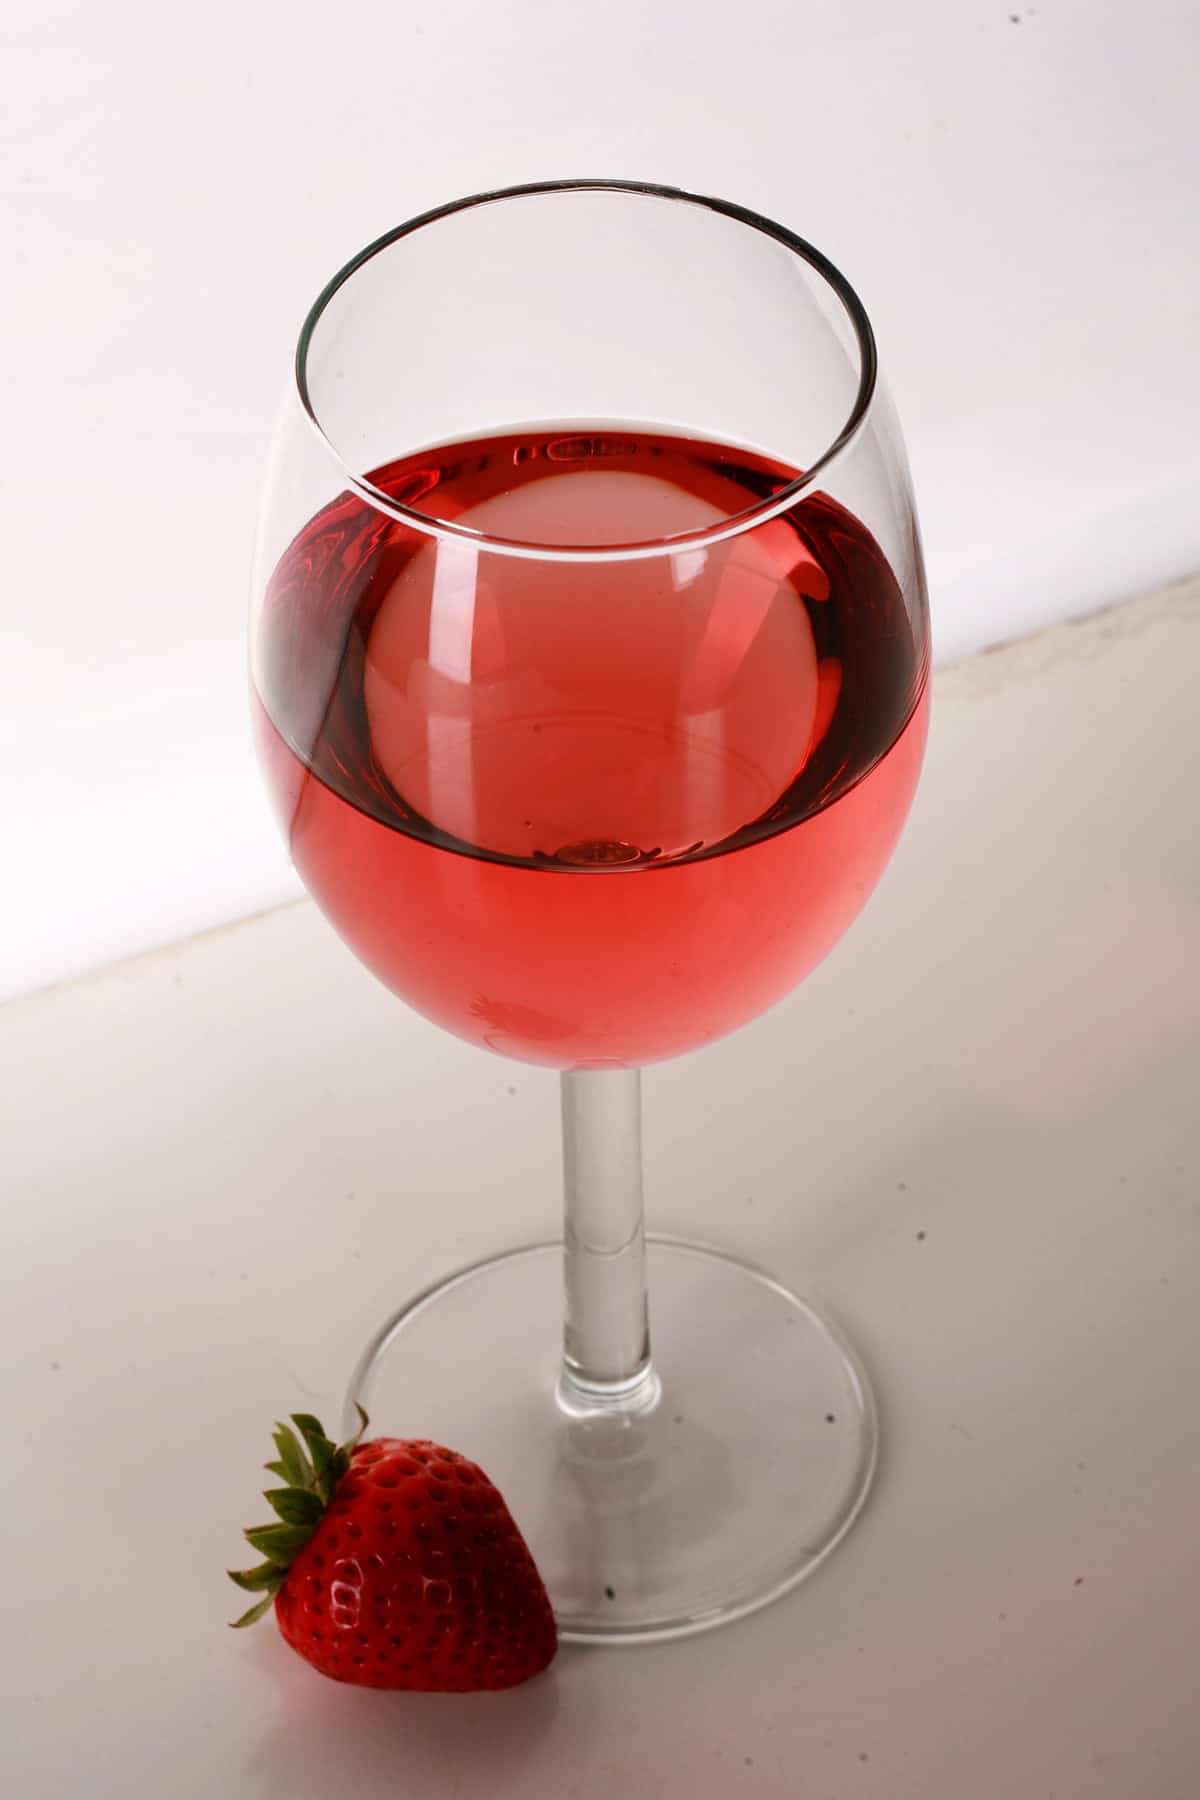 A glass of pale red strawberry wine with a single strawberry at the base of the glass.